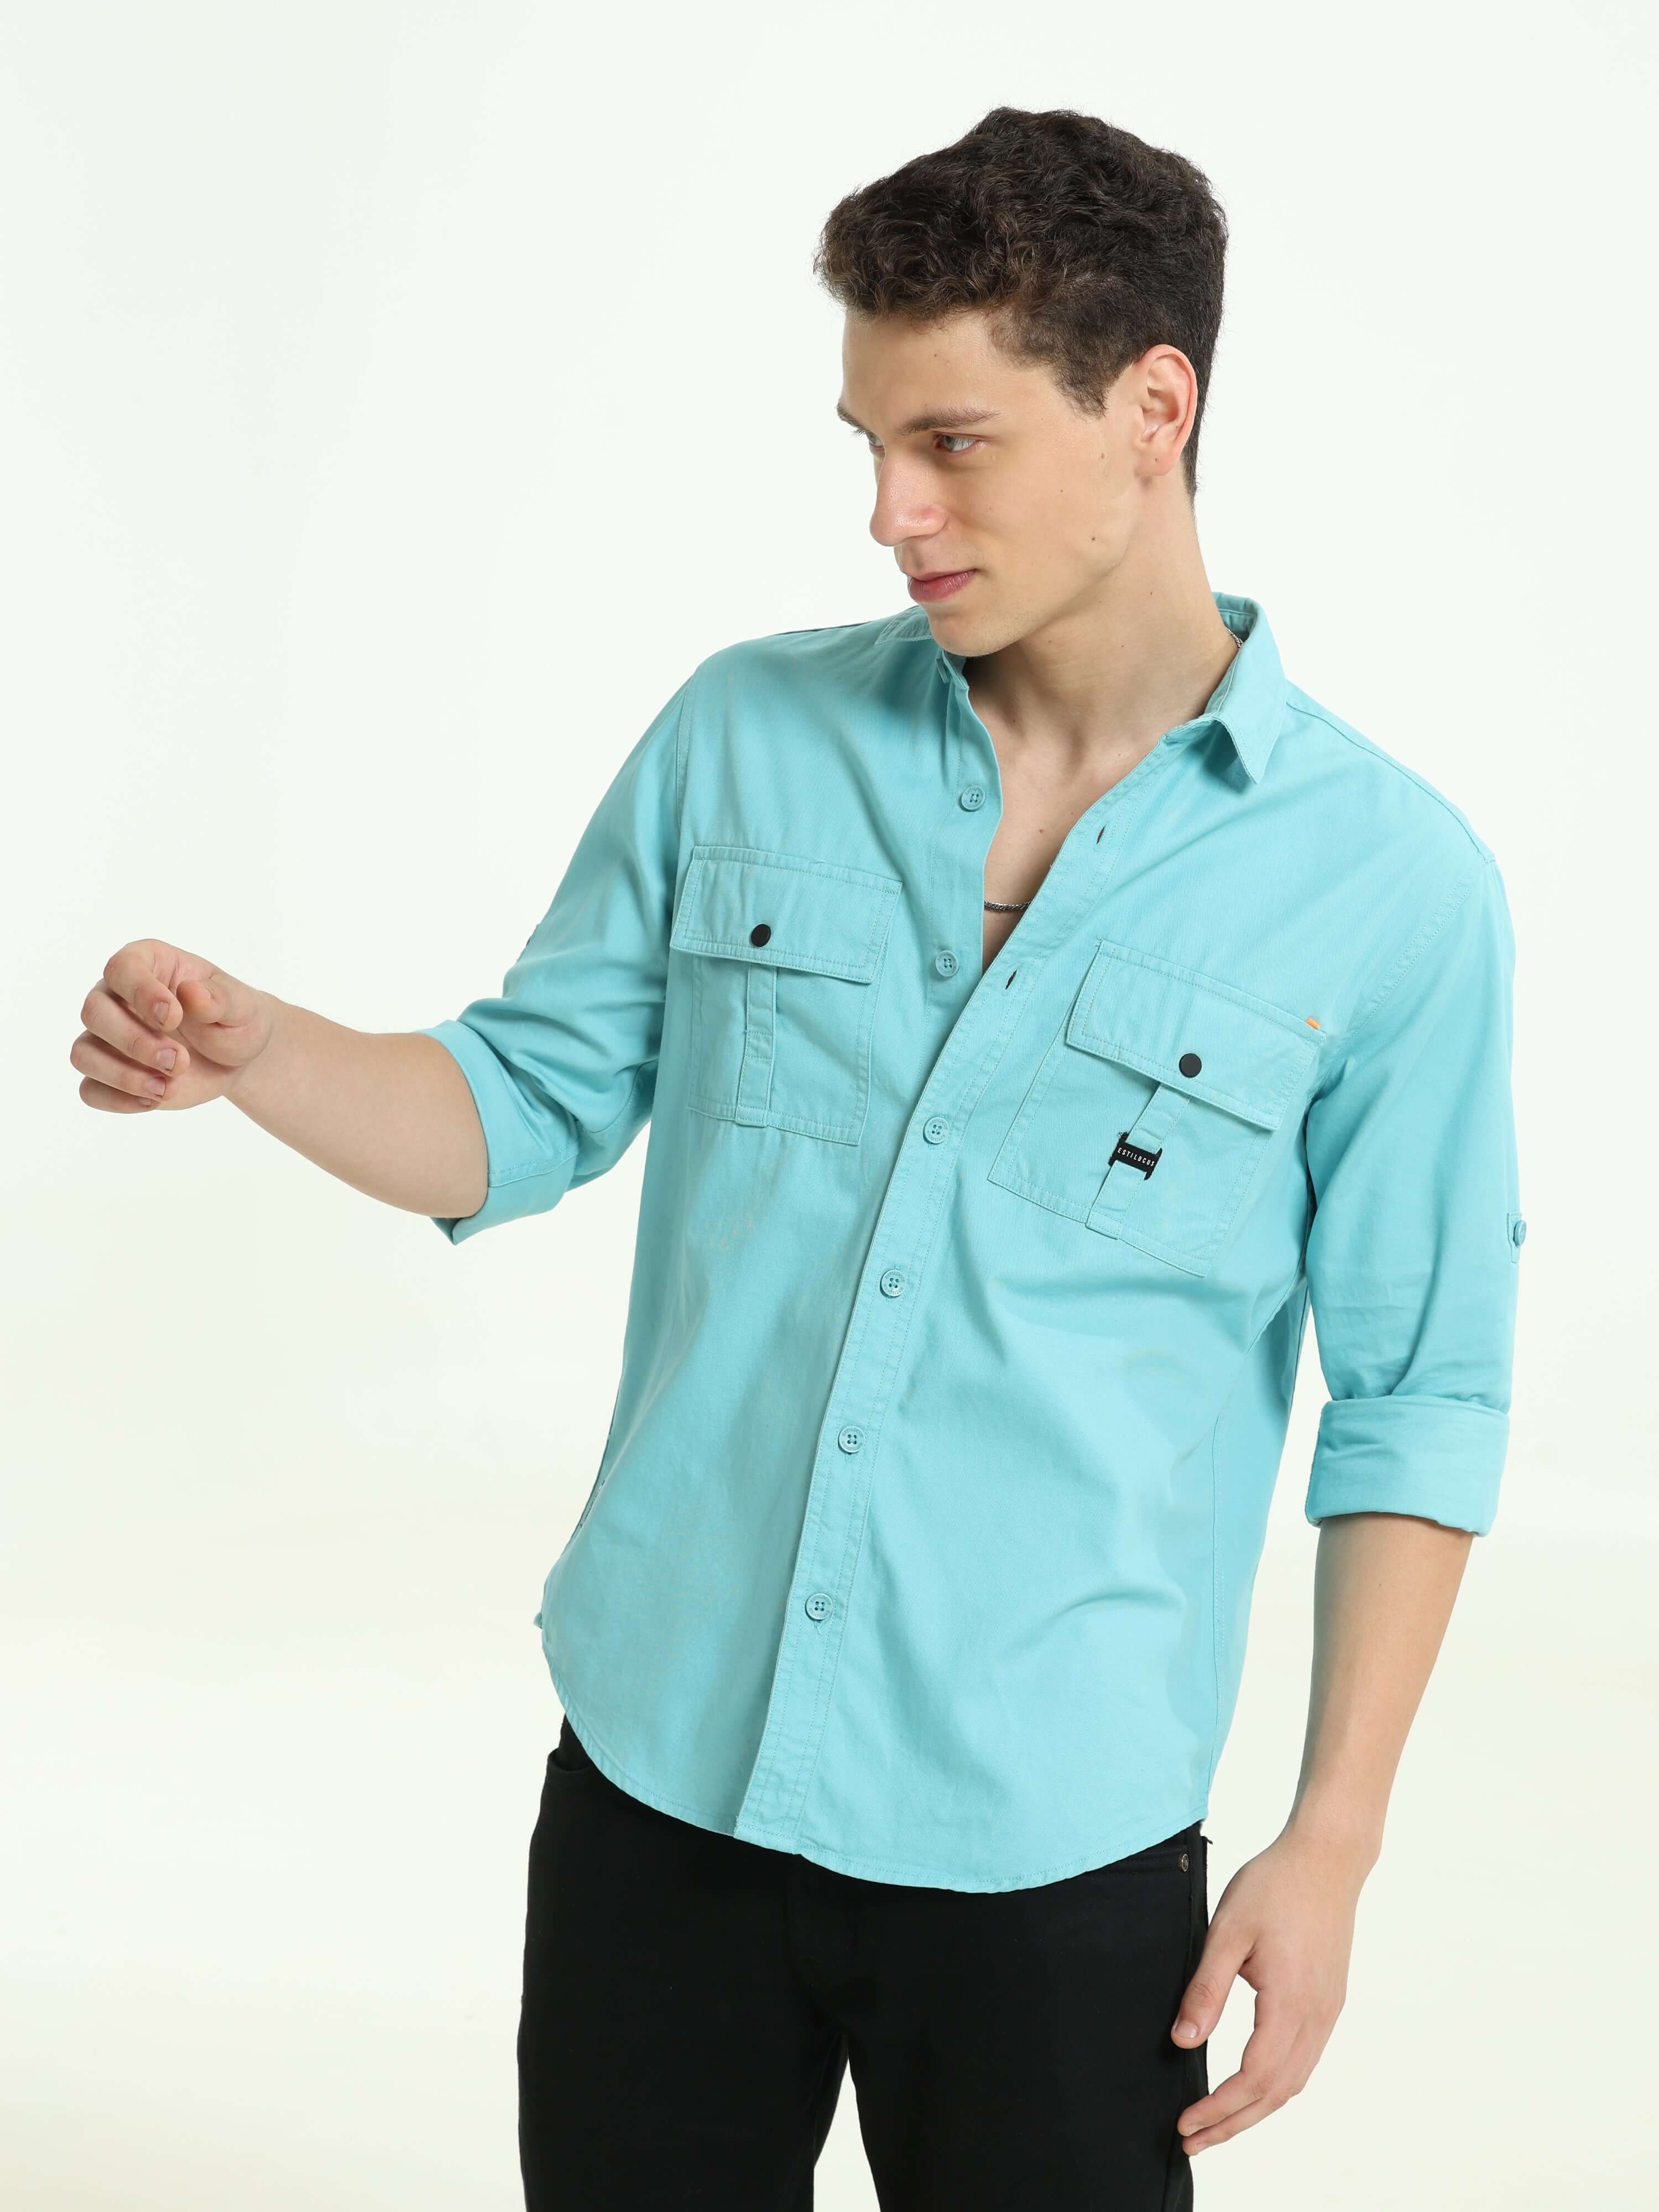 Vivid sky Solid double pocket shirt shop online at Estilocus. 100% Cotton • Full-sleeve solid shirt• Cut and sew placket• Regular collar• Double button edge cuff • Double pocket with flap • Curved bottom hemline• Finest printing at front placket. • All do